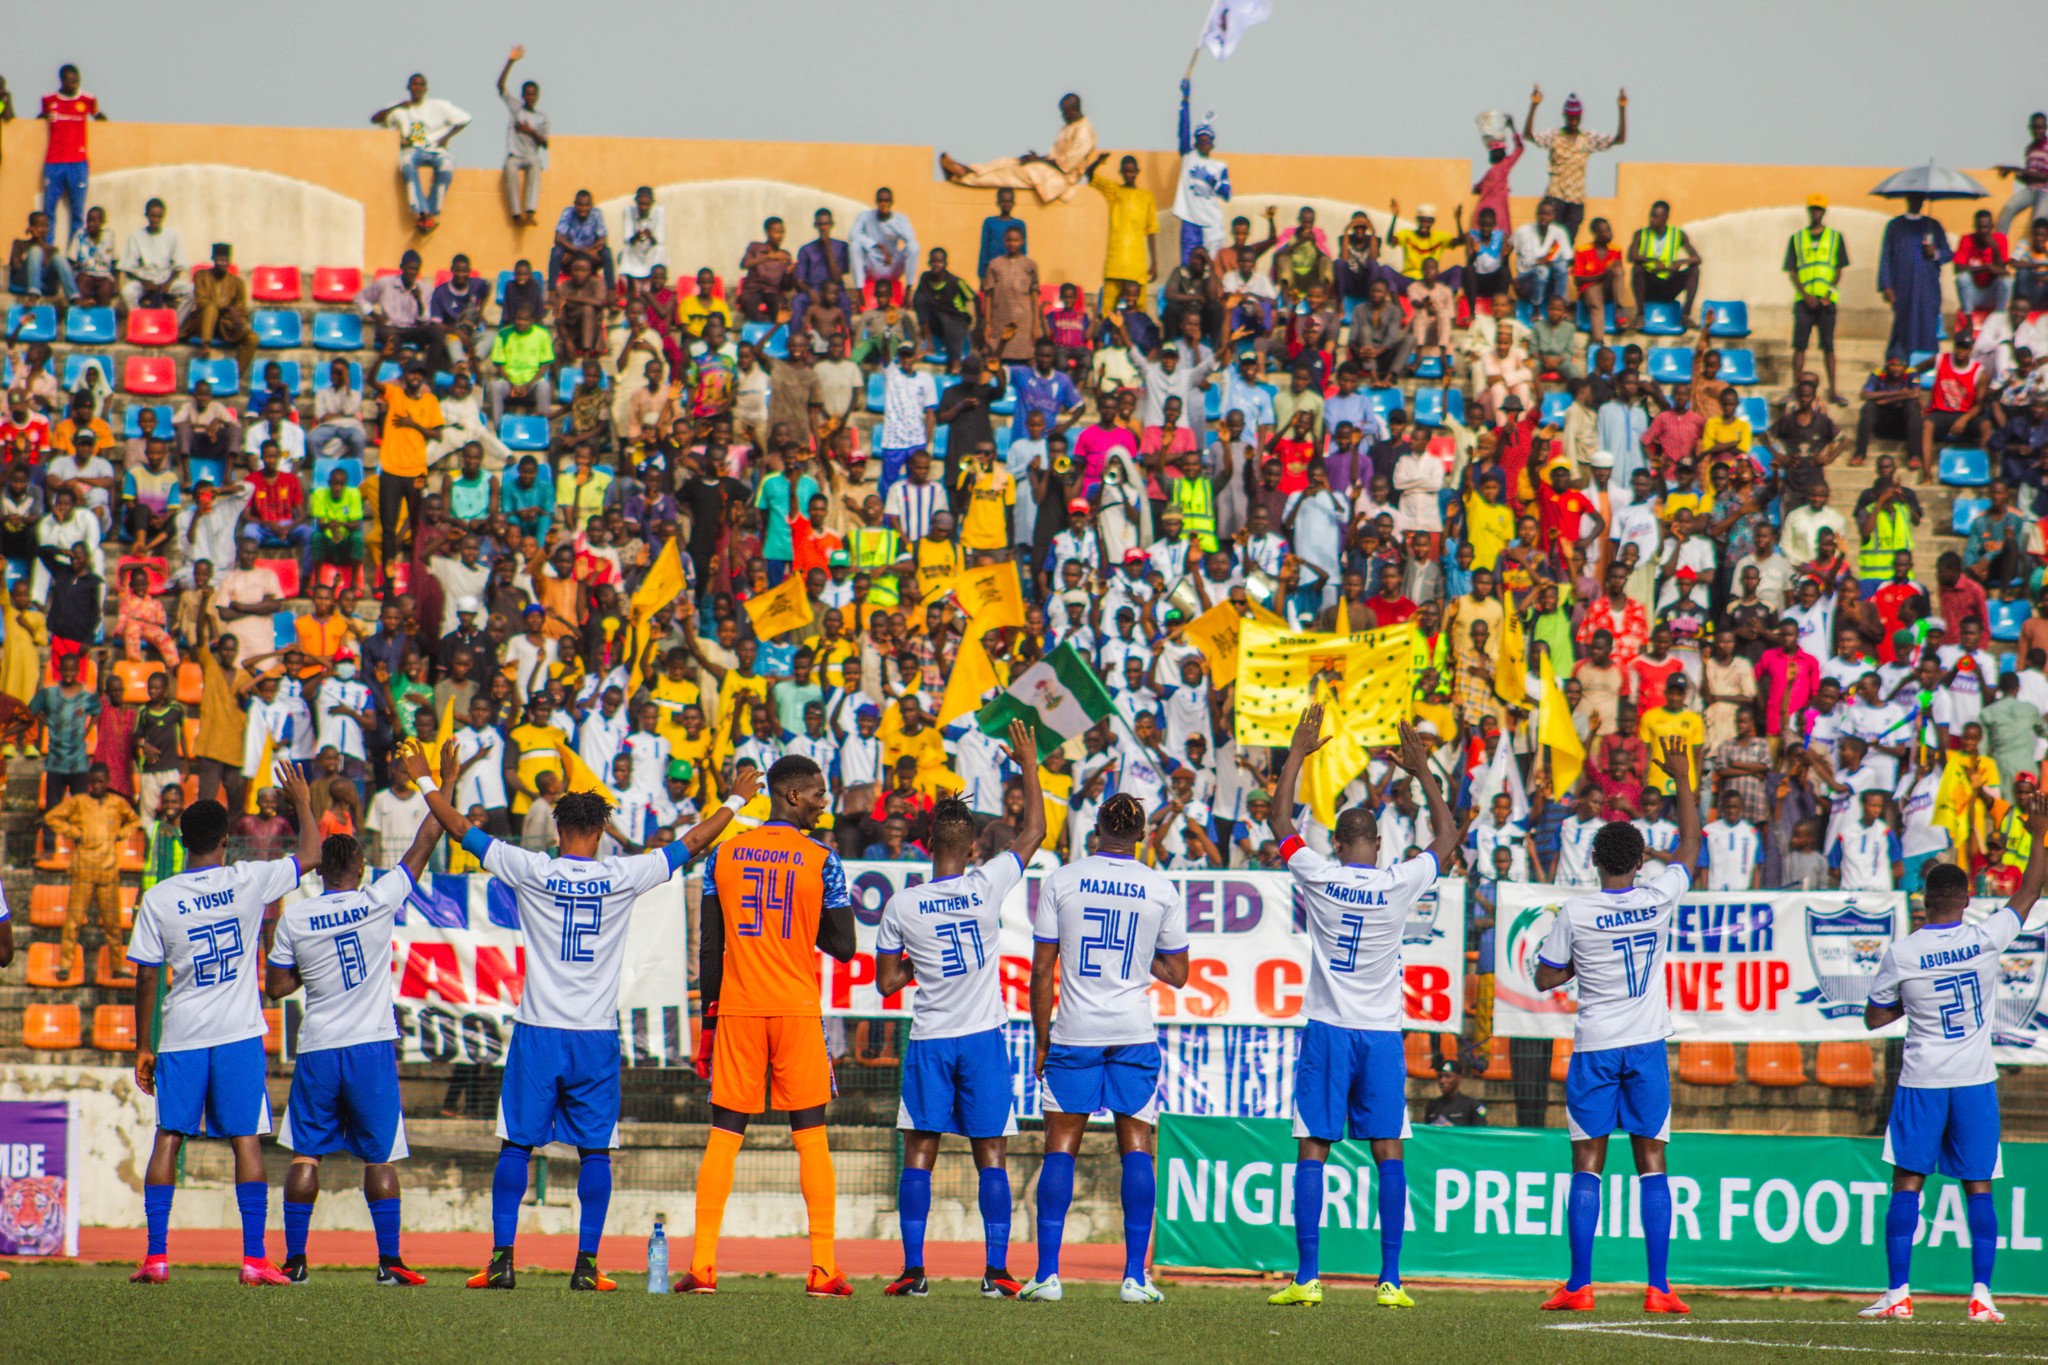 NPFL Chairman offers support to Doma United after accident